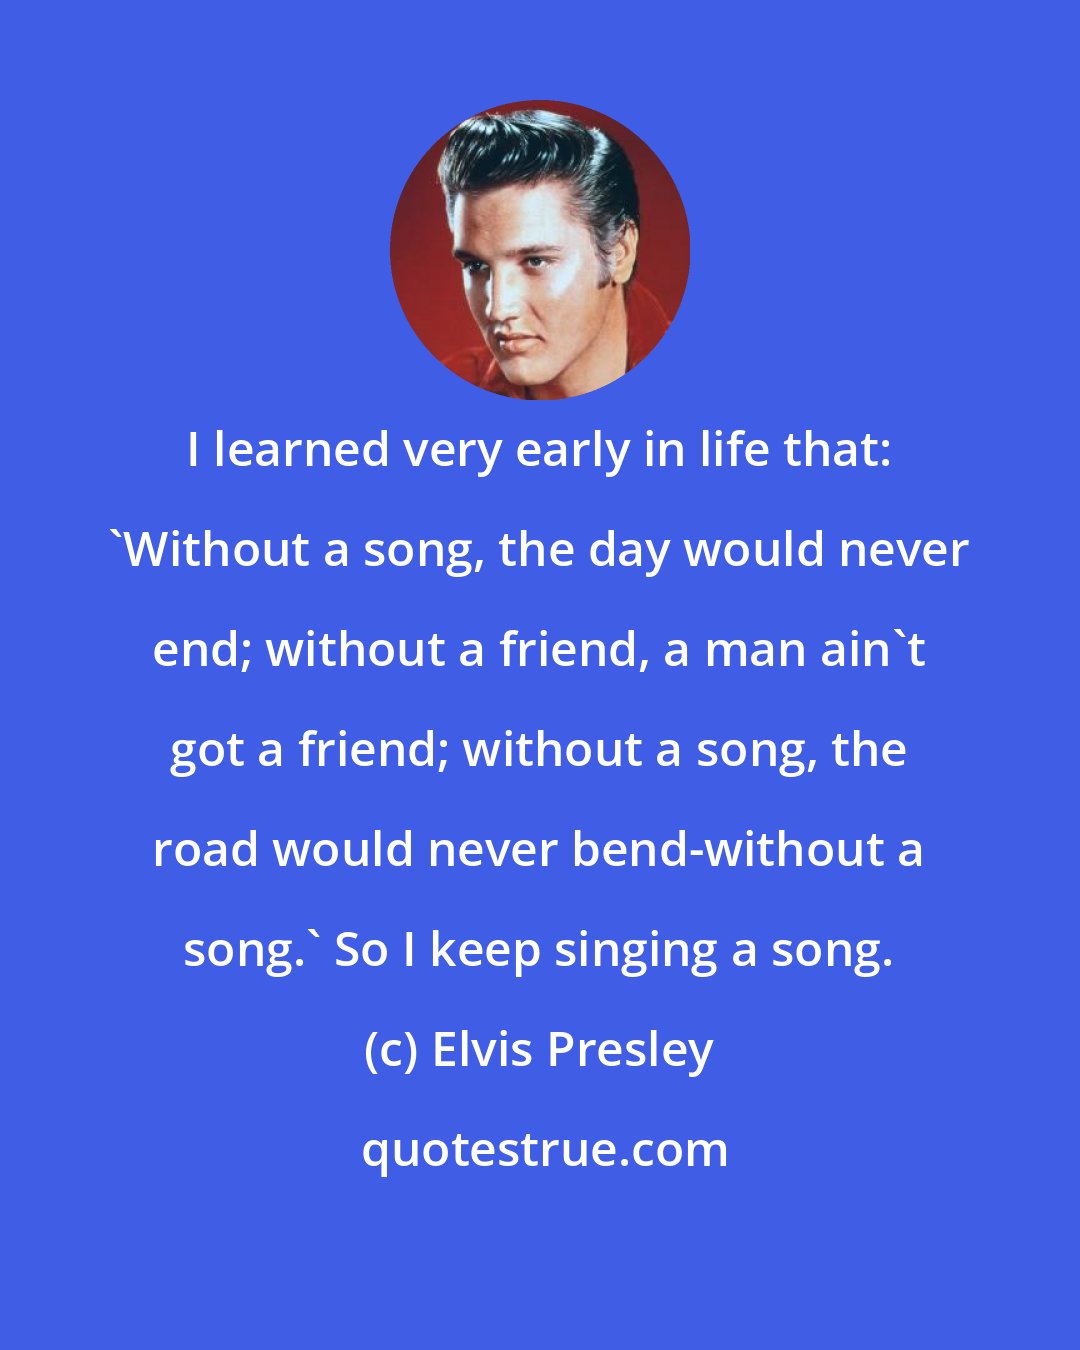 Elvis Presley: I learned very early in life that: 'Without a song, the day would never end; without a friend, a man ain't got a friend; without a song, the road would never bend-without a song.' So I keep singing a song.